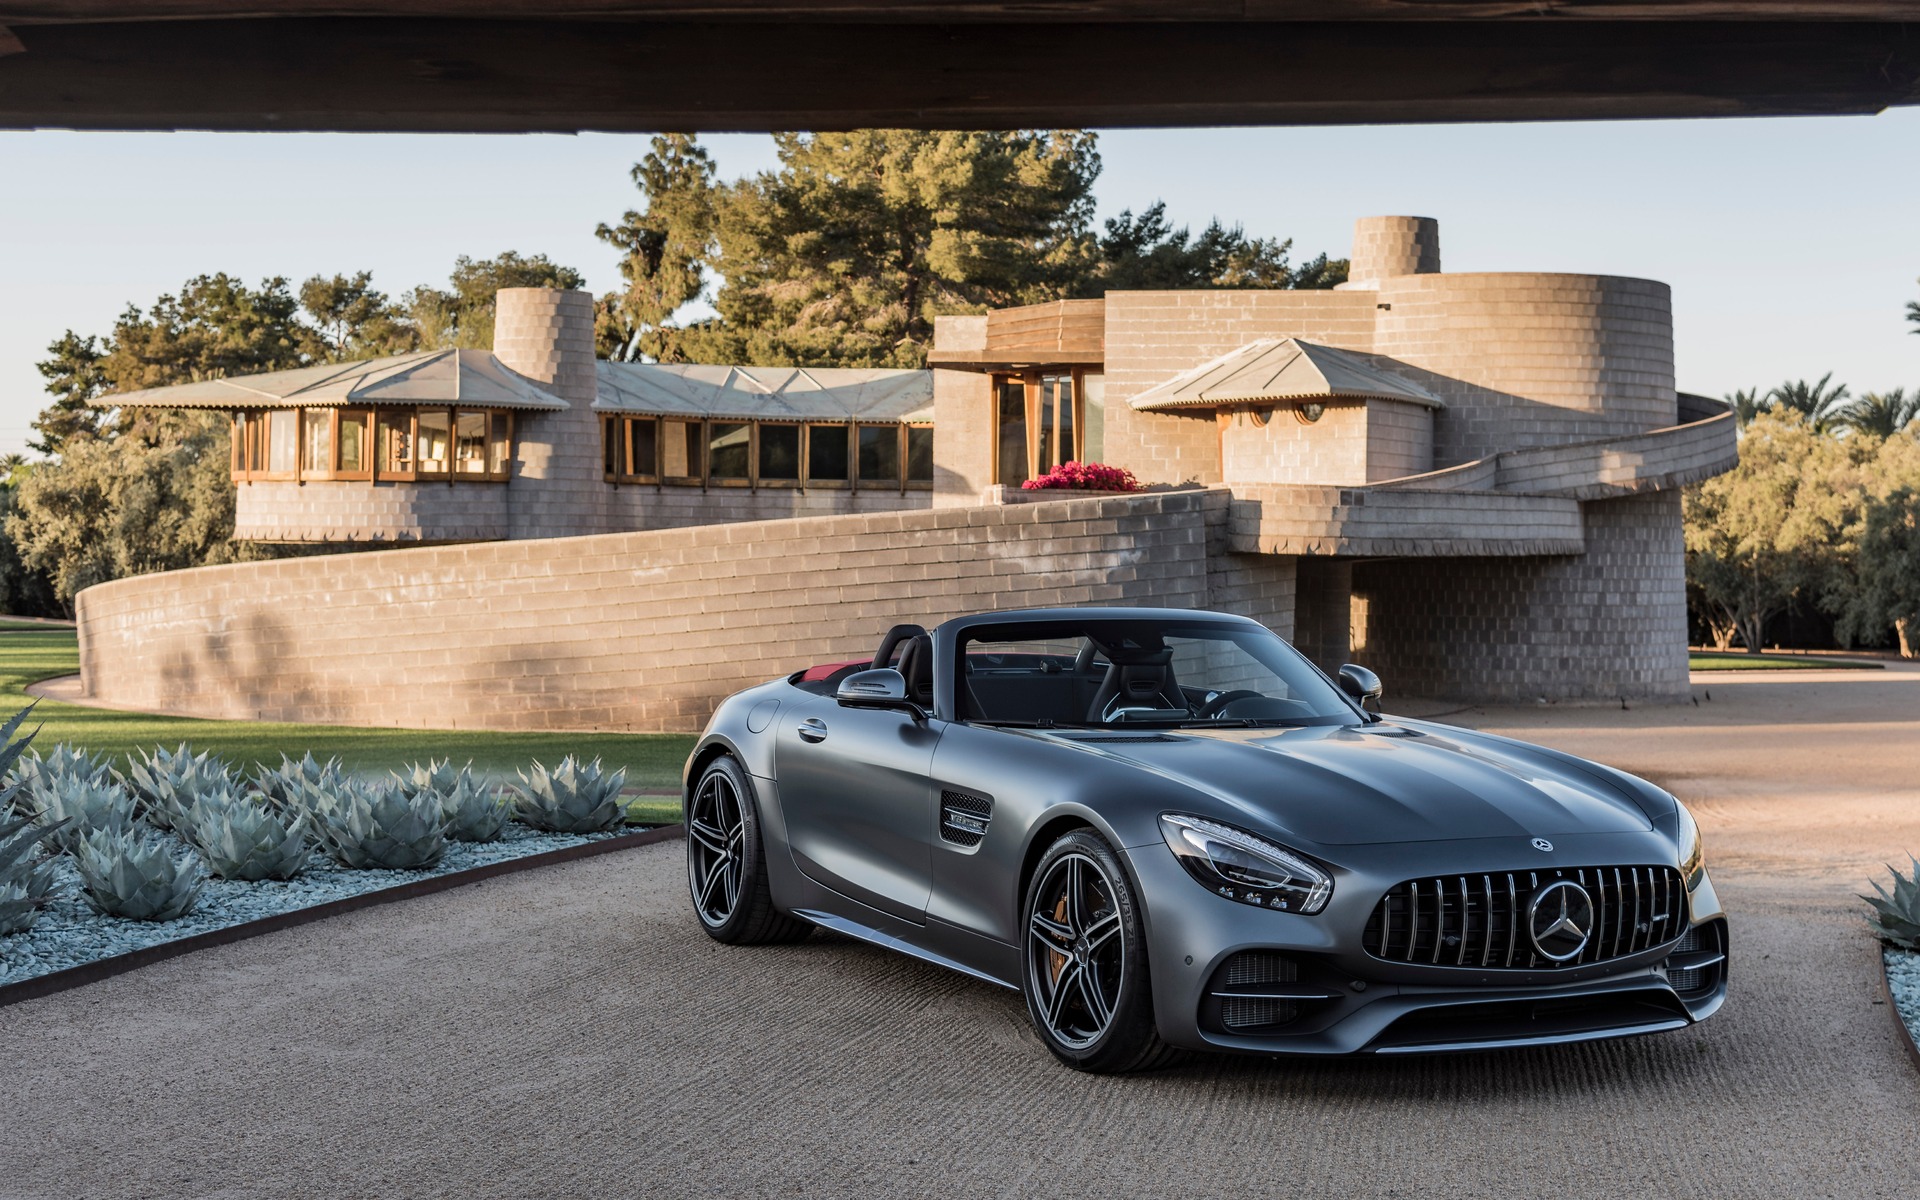 <p>2018 Mercedes-AMG GT C Roadster - Picture-perfect postcard.</p>